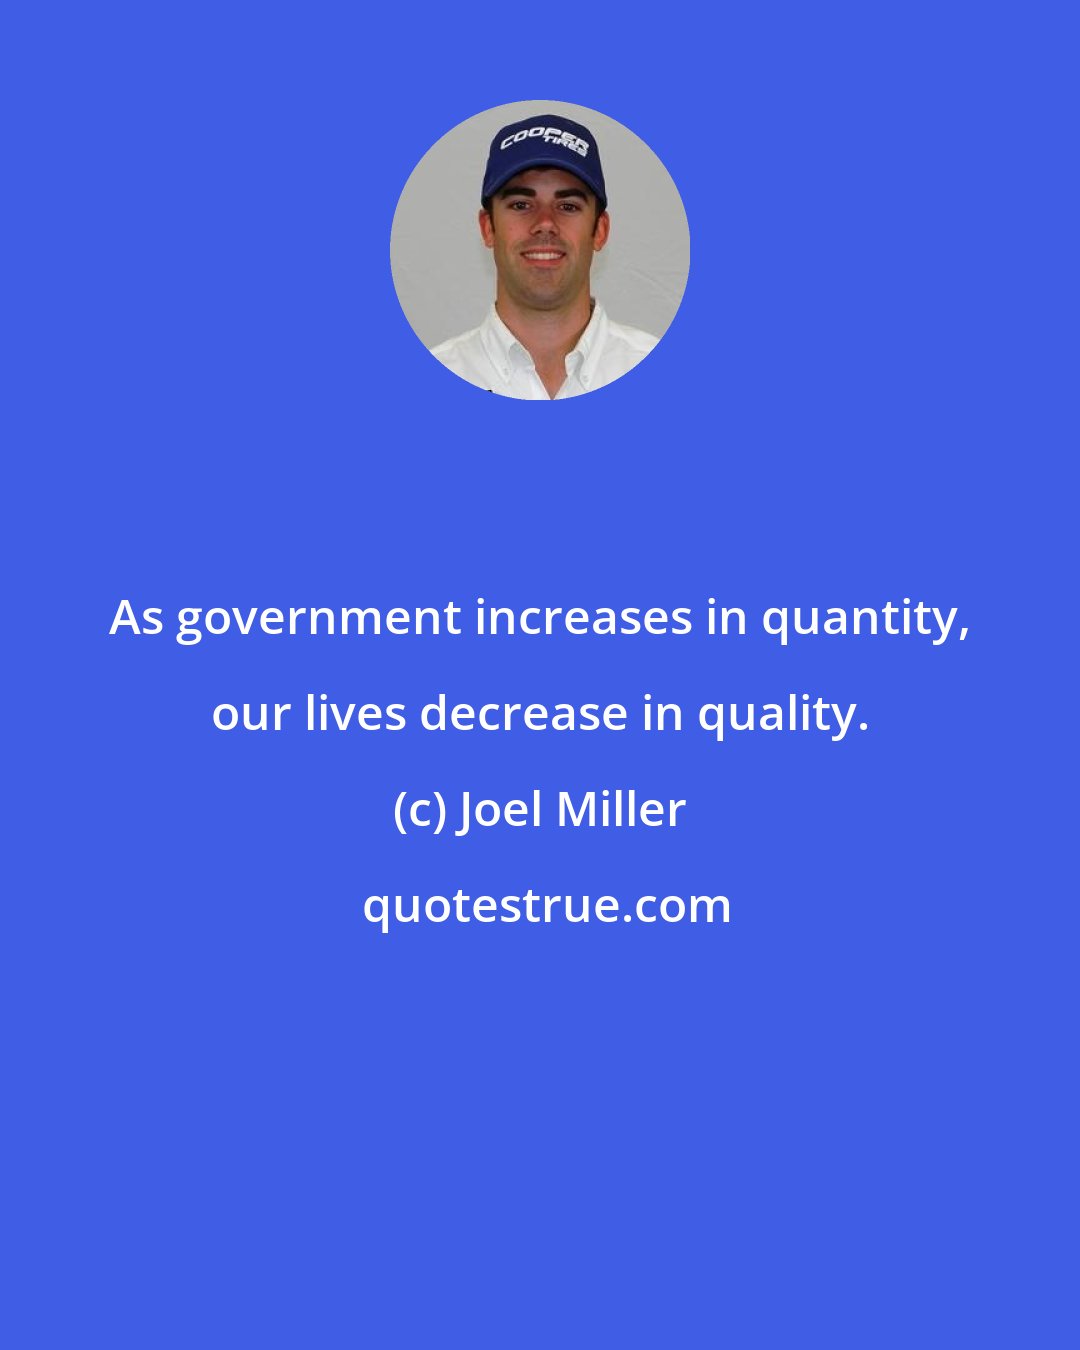 Joel Miller: As government increases in quantity, our lives decrease in quality.